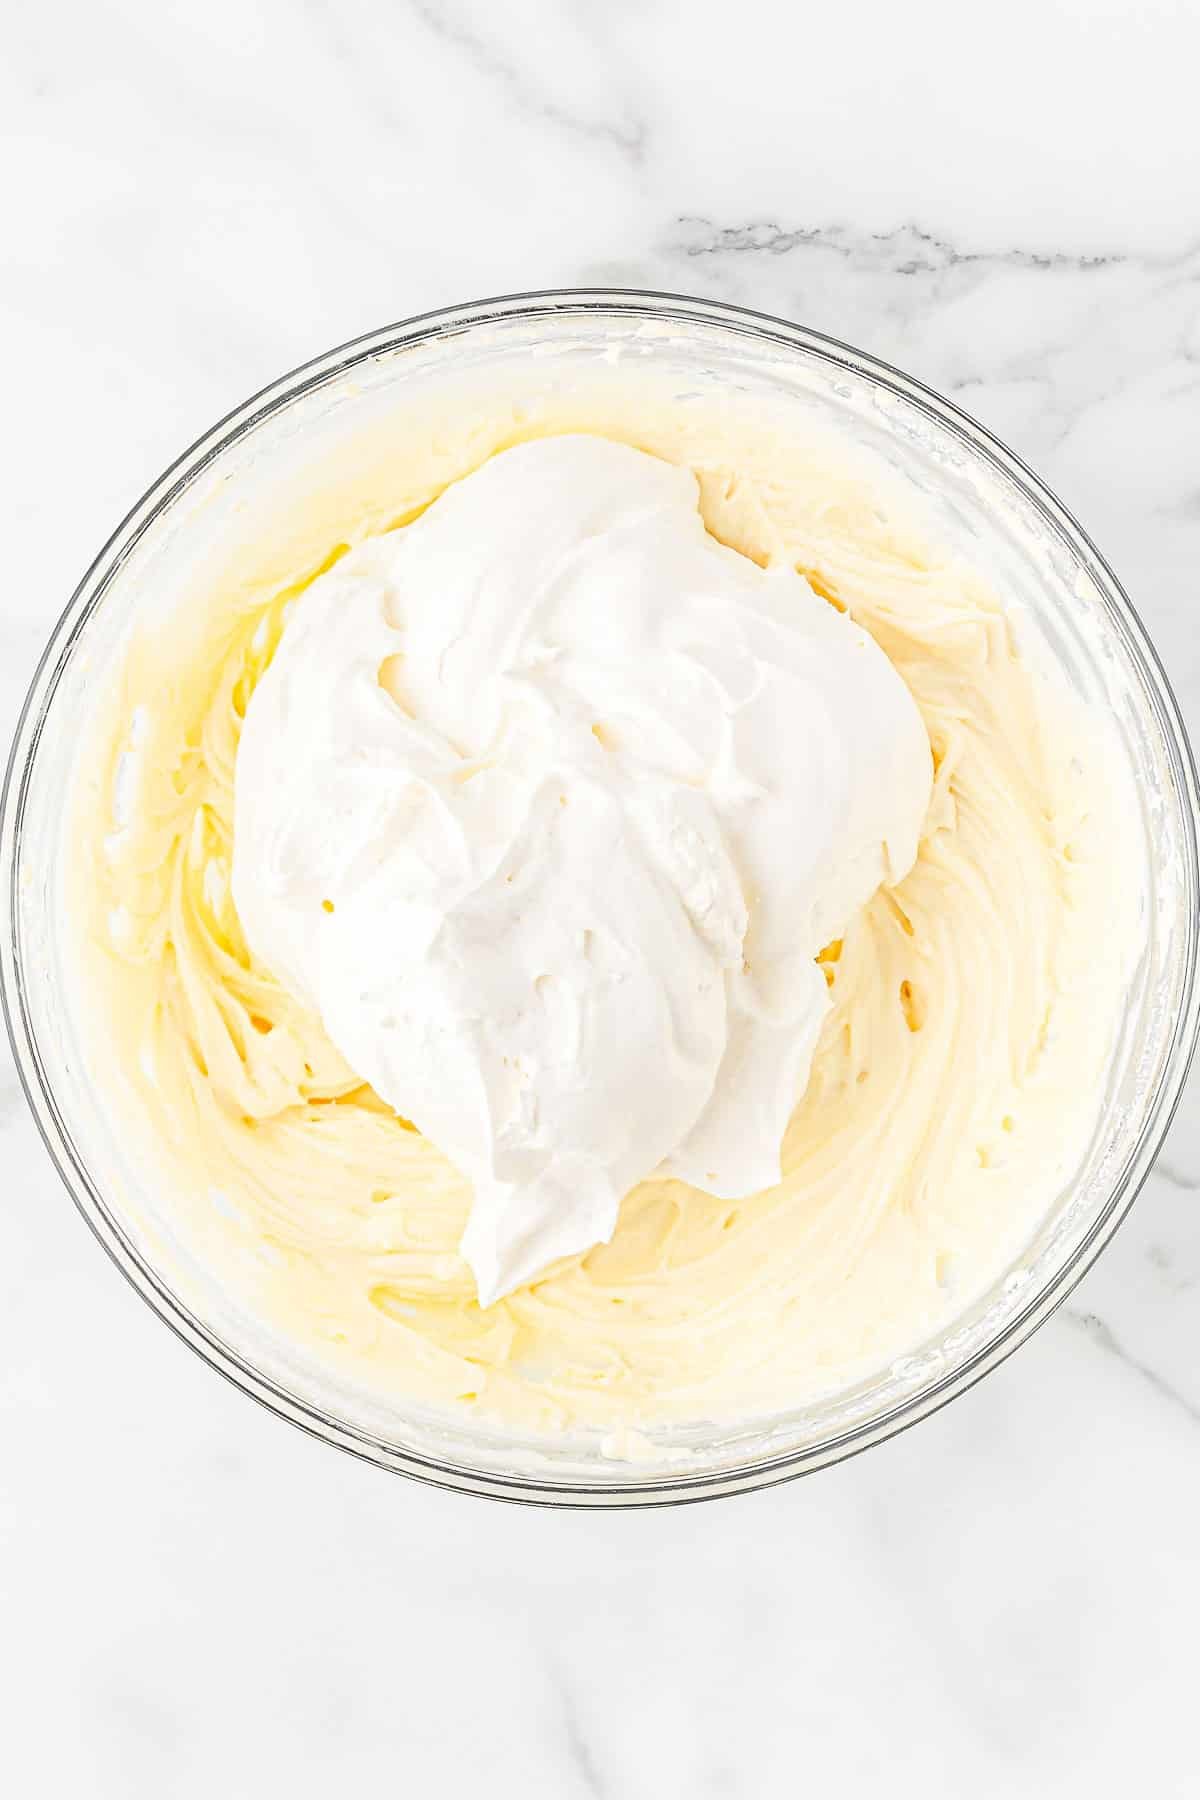 Cream cheese and cool whip in a large mixing bowl.